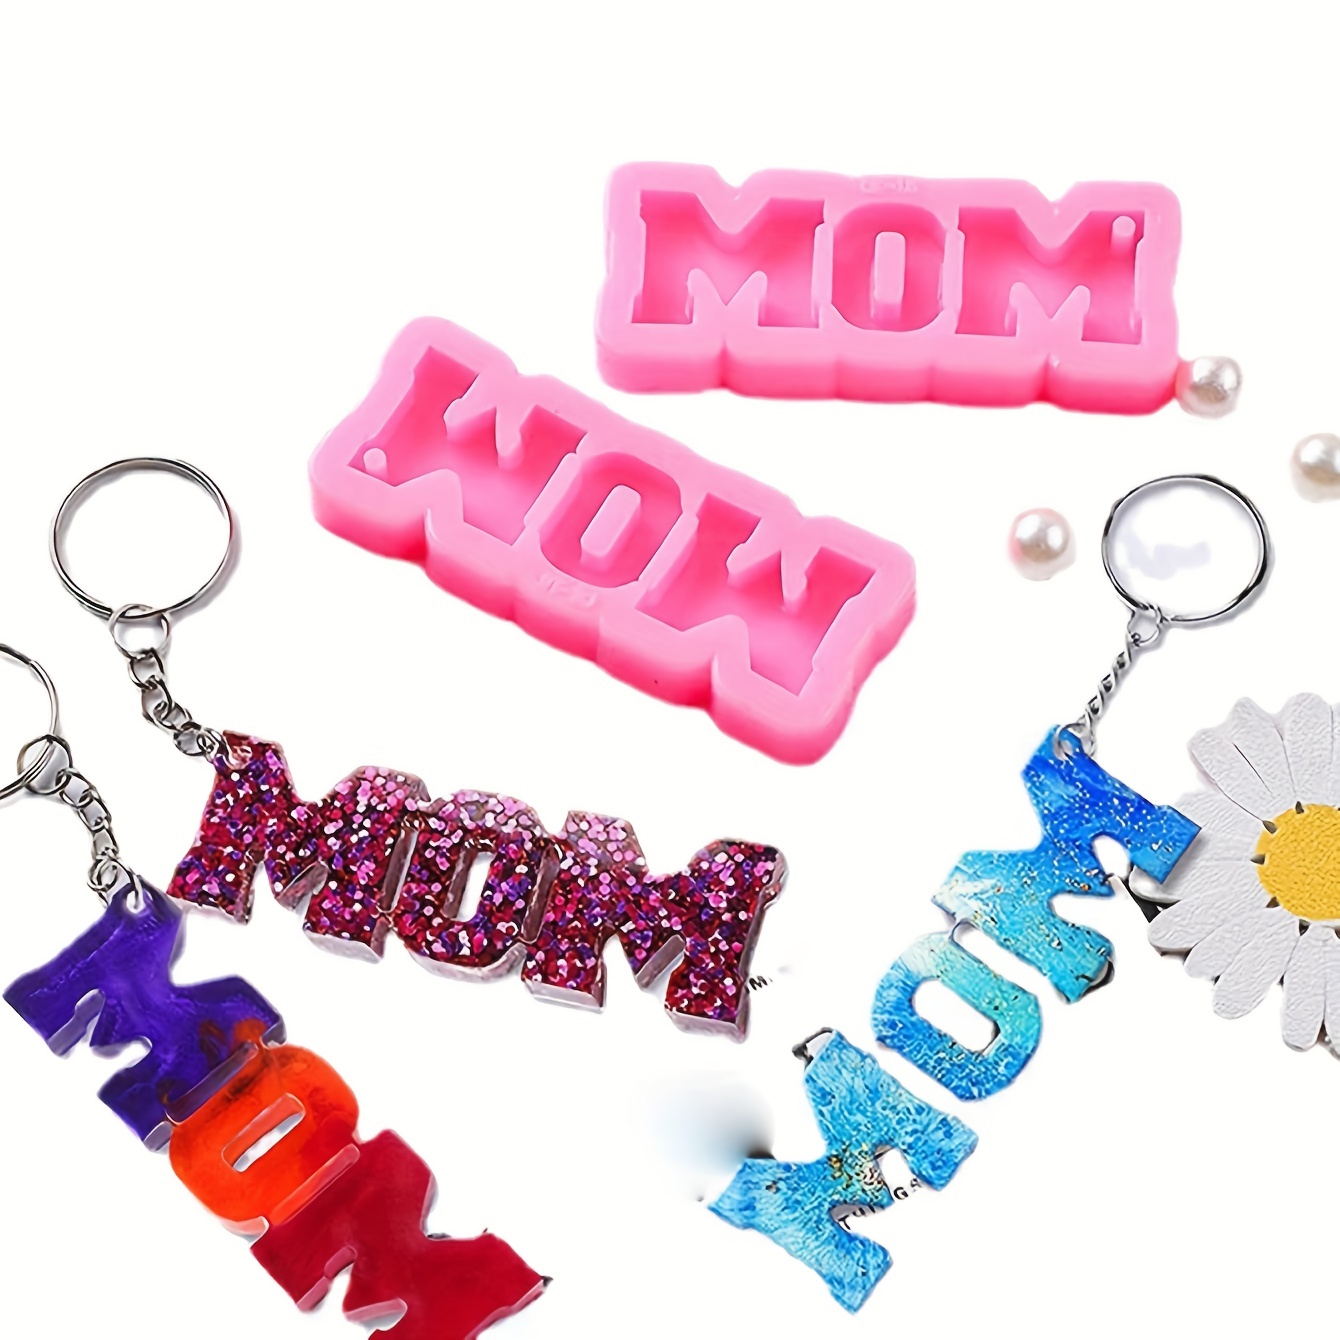 Mom Name Mold, Mom Keychain Resin Mold, Jewelry Making Silicone Mold, Gifts  for Mom, Resin Keychain Molds 